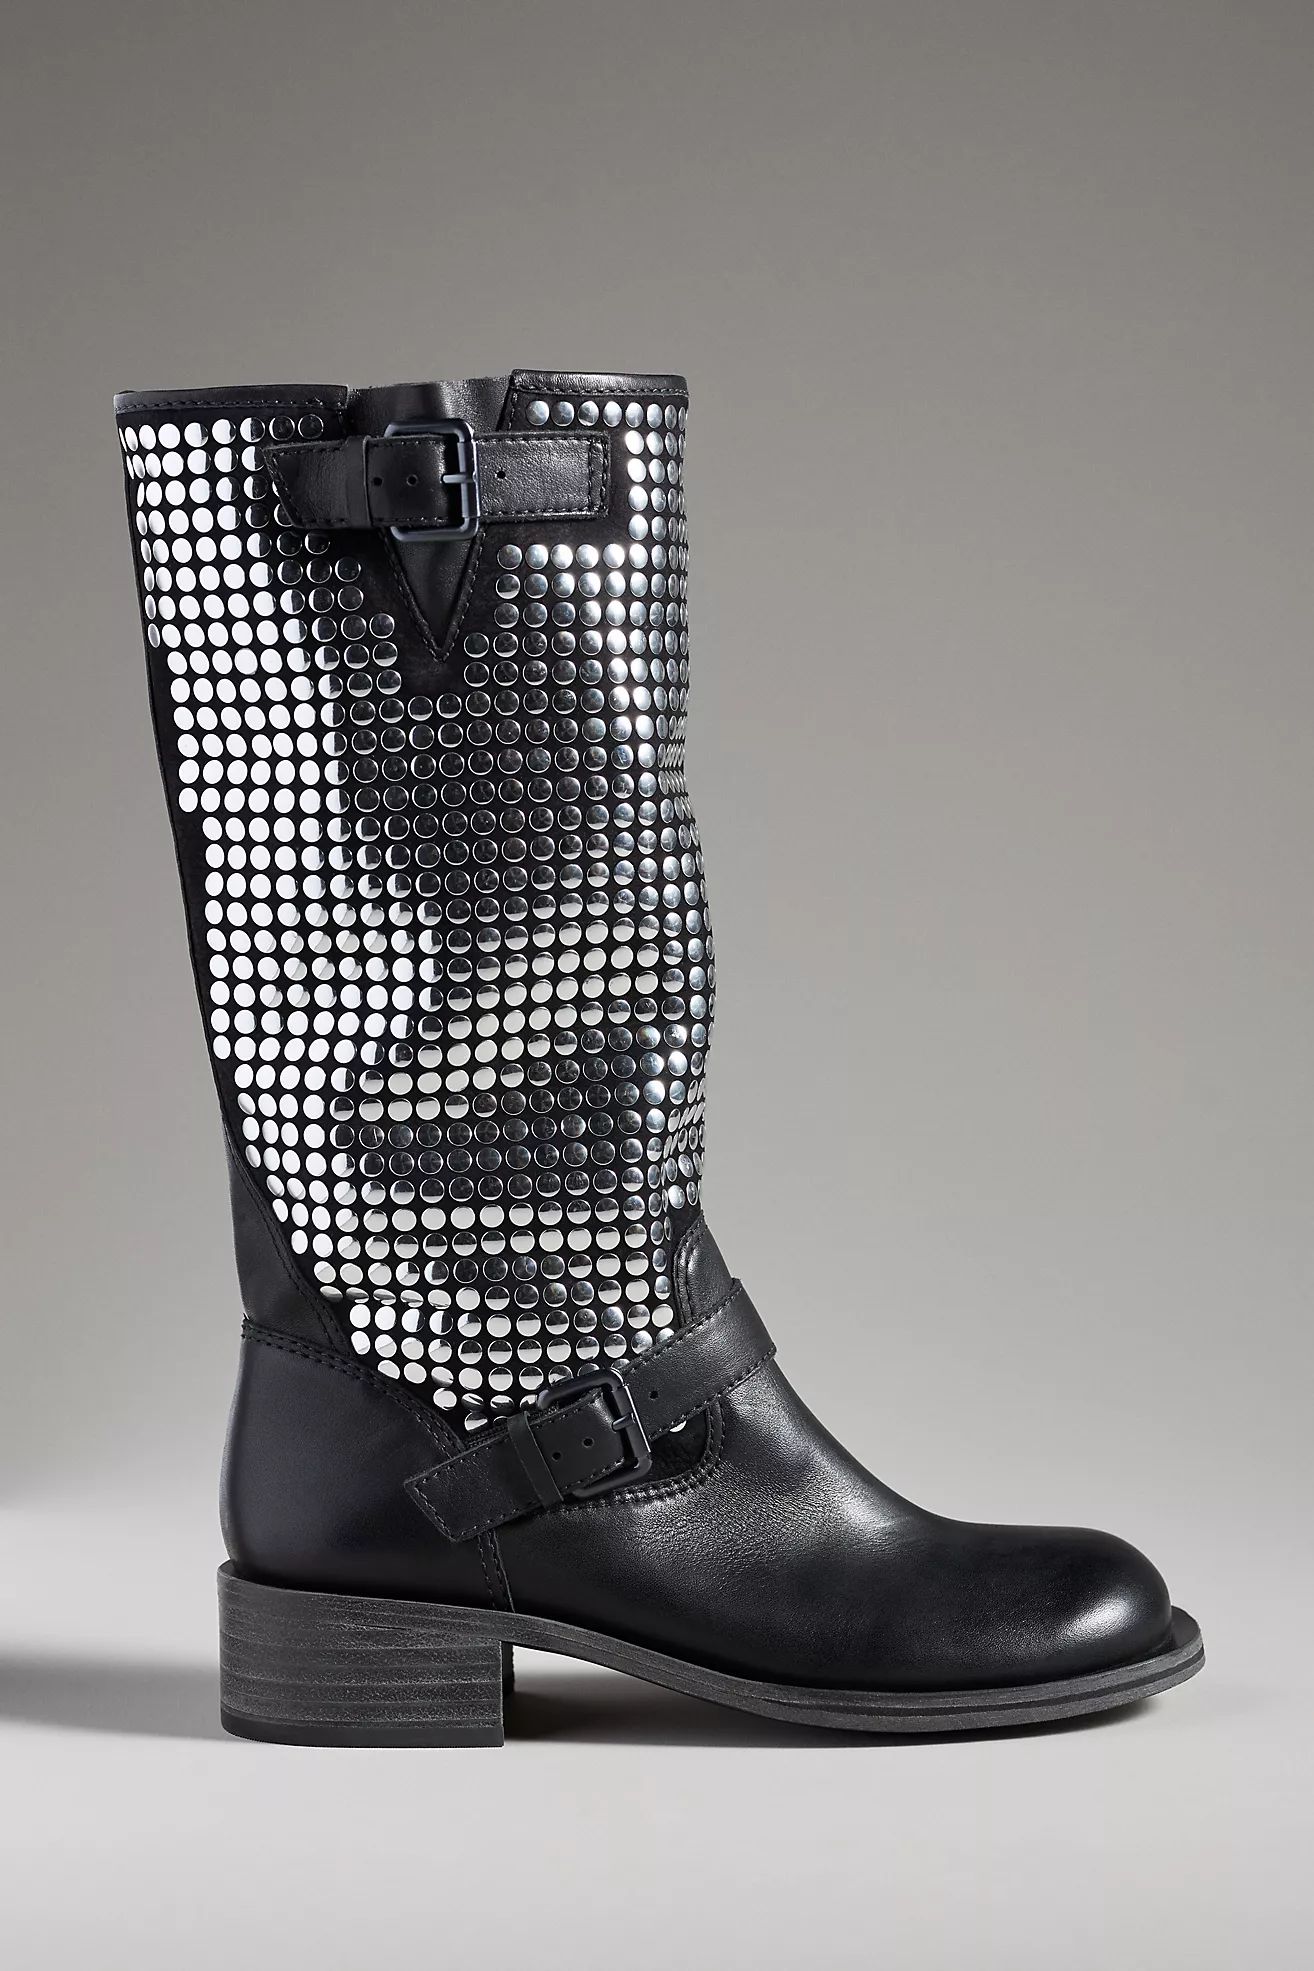 Vicenza Studded Moto Boots | Anthropologie (US)